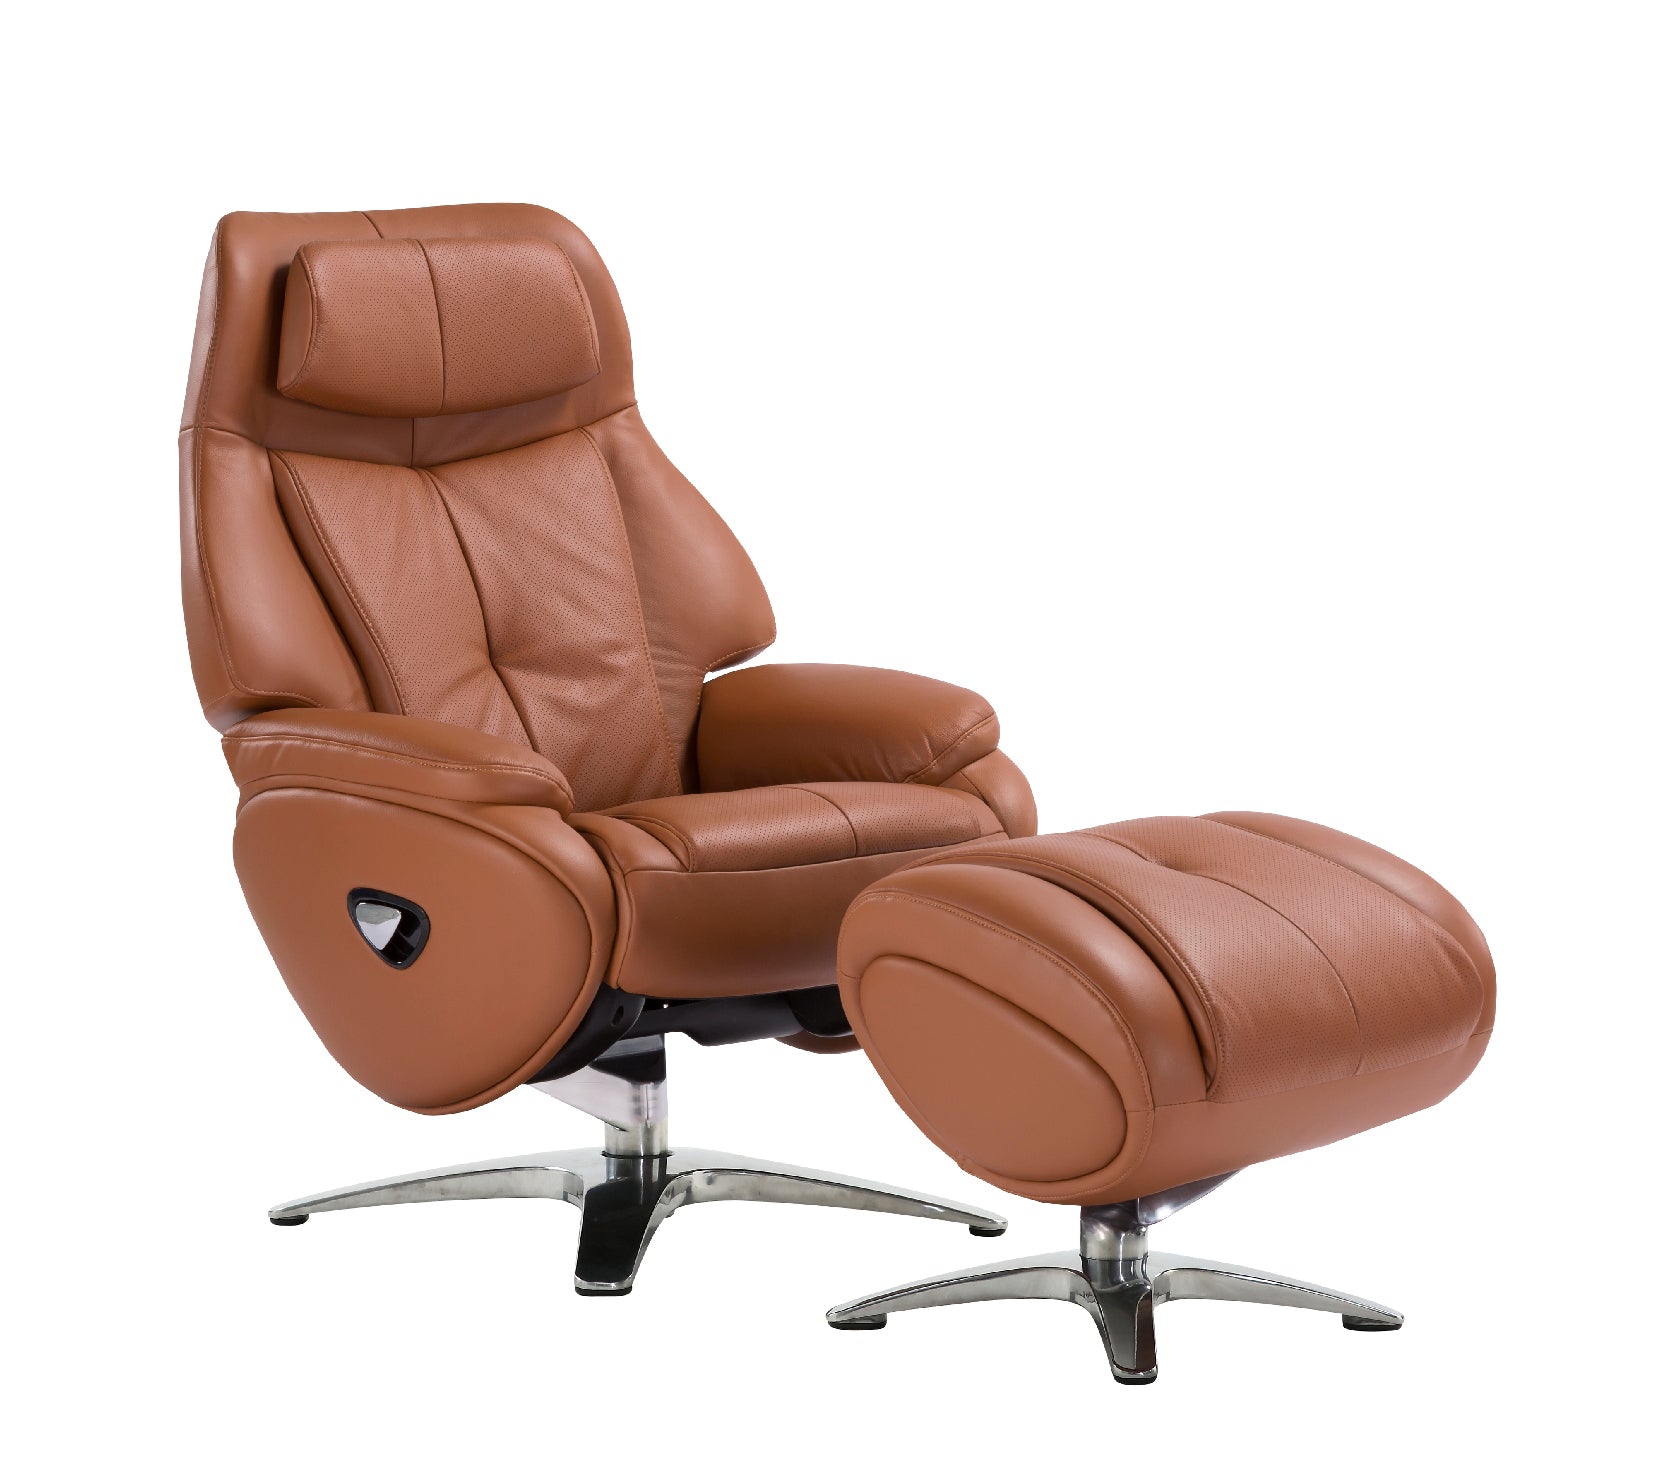 Alpha 168 (Tobacco) Recliner Chair *ONLY DISPLAY AT NUNAWADING STORE*